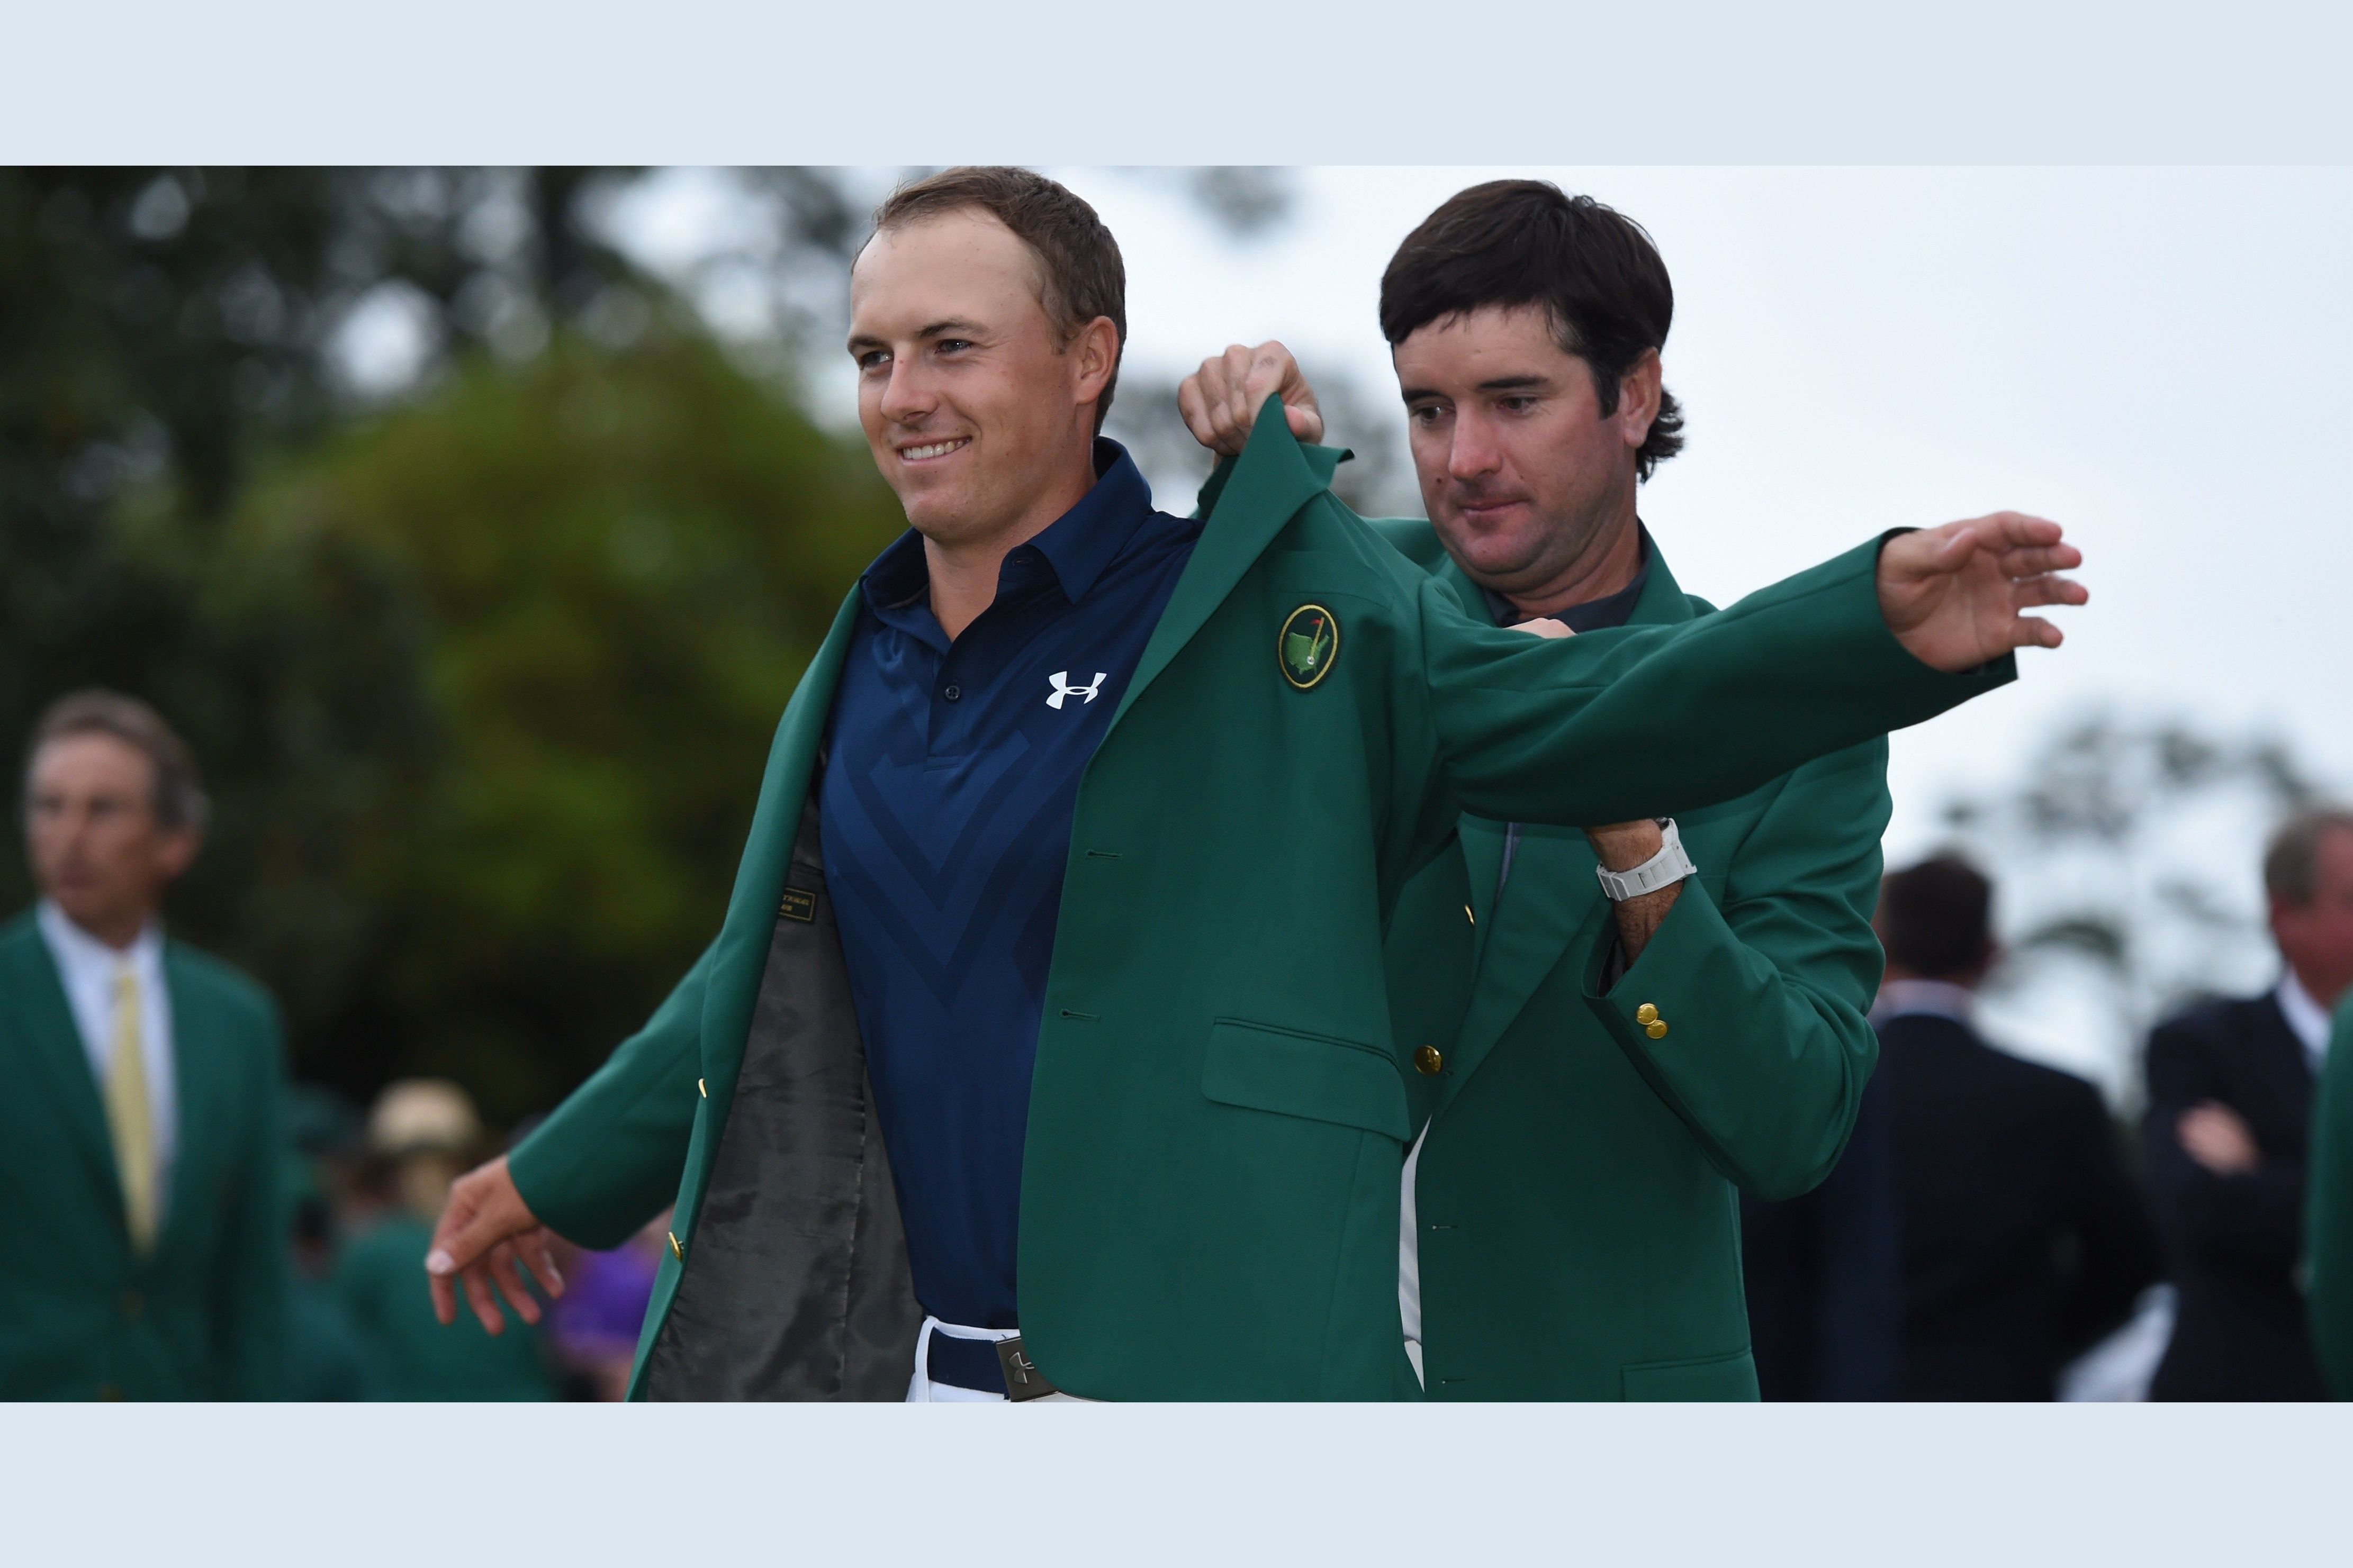 Which Of These Players Will Win The Masters Tournament?